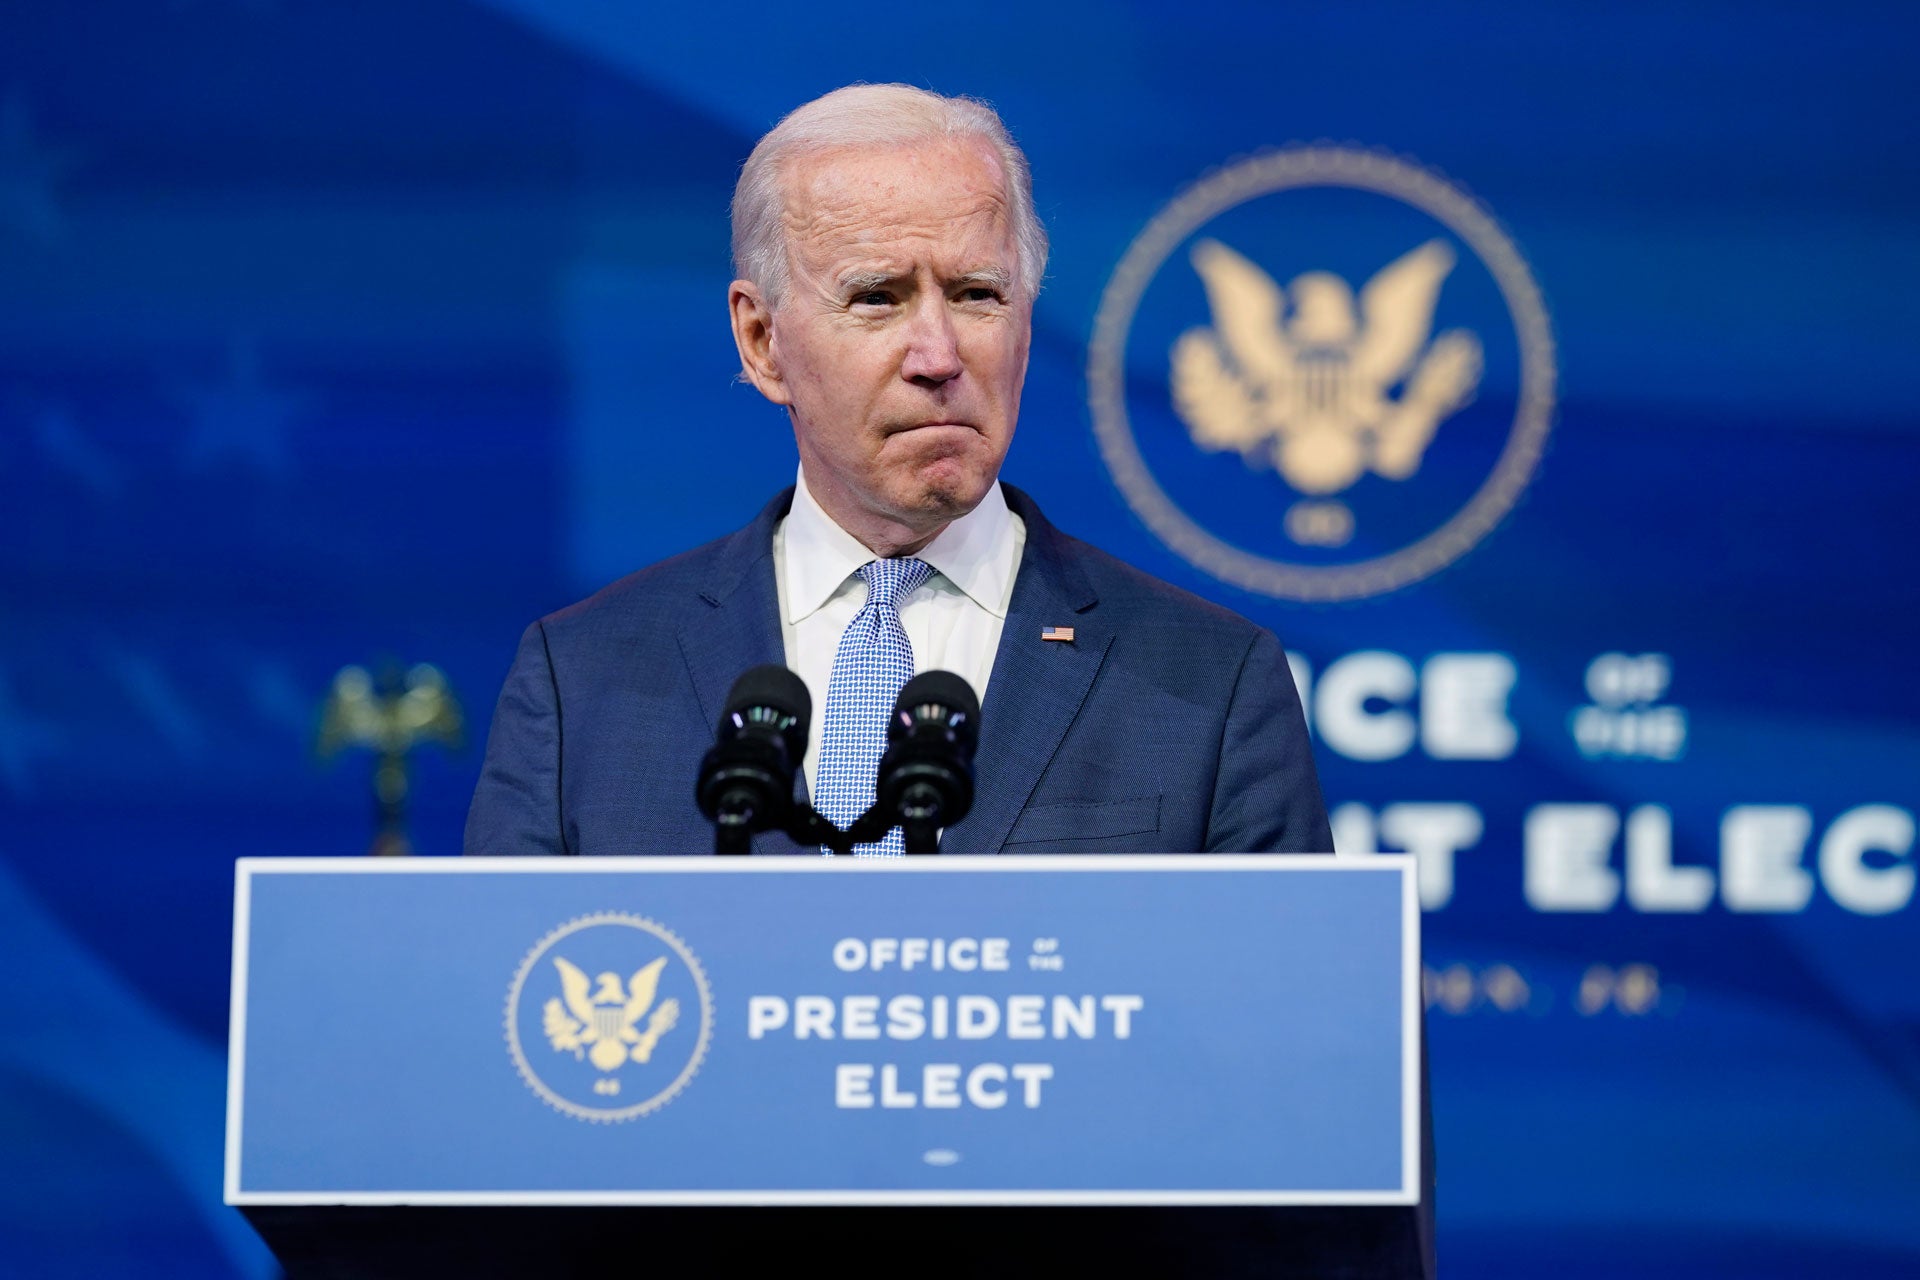 Biden Can’t Make Washington a Beacon for Human Rights by Returning to Business as Usual